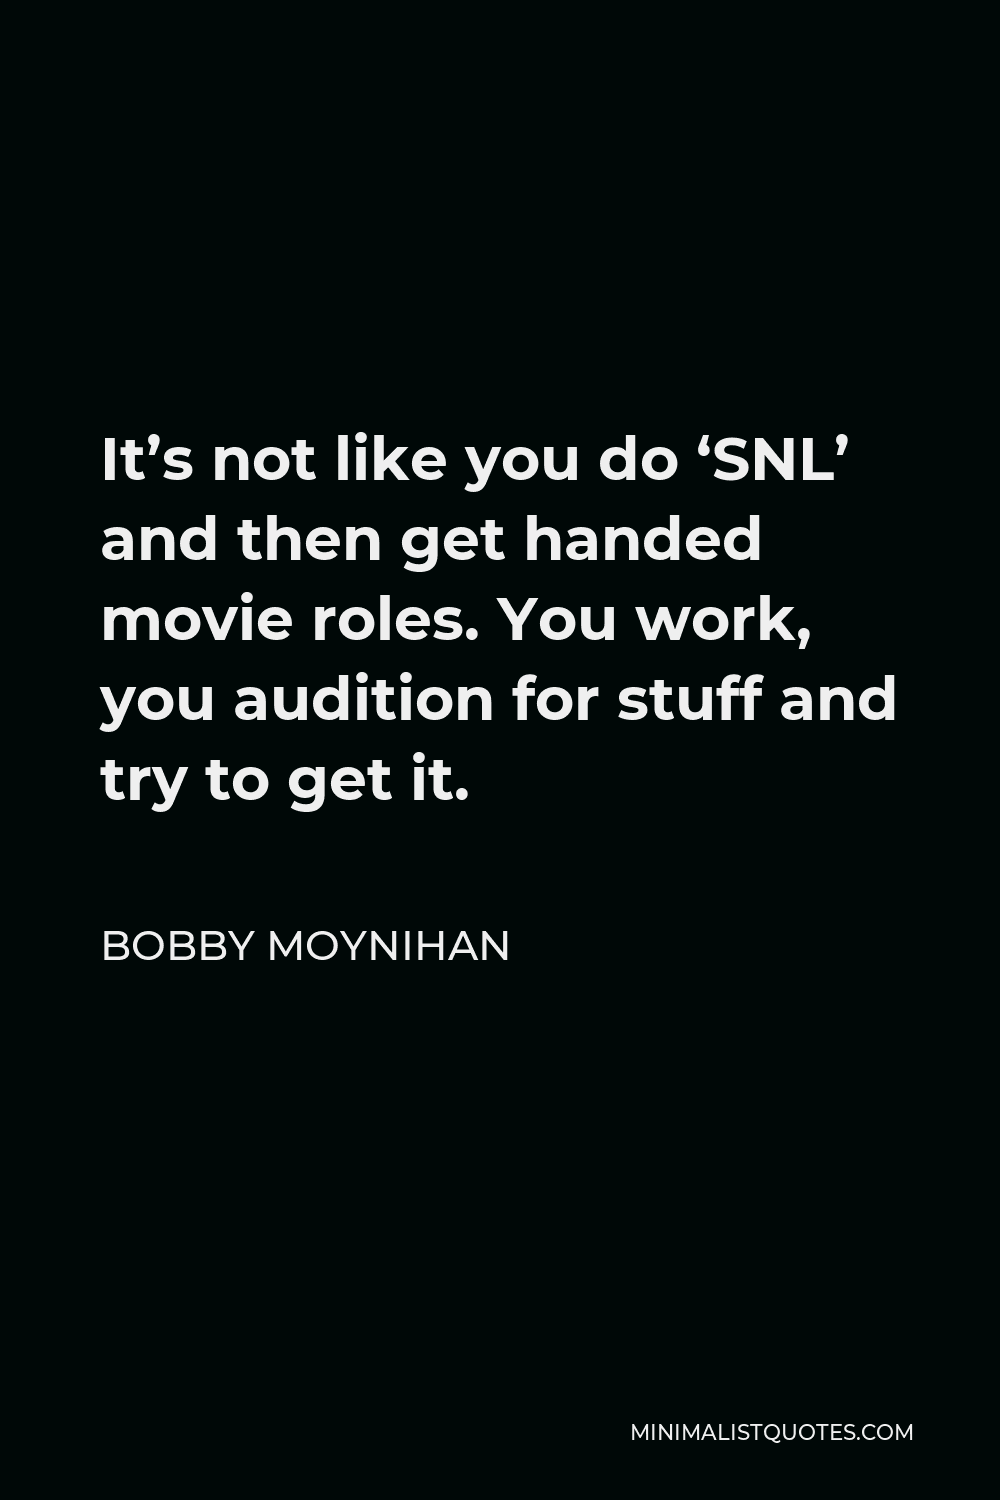 Bobby Moynihan Quote - It’s not like you do ‘SNL’ and then get handed movie roles. You work, you audition for stuff and try to get it.